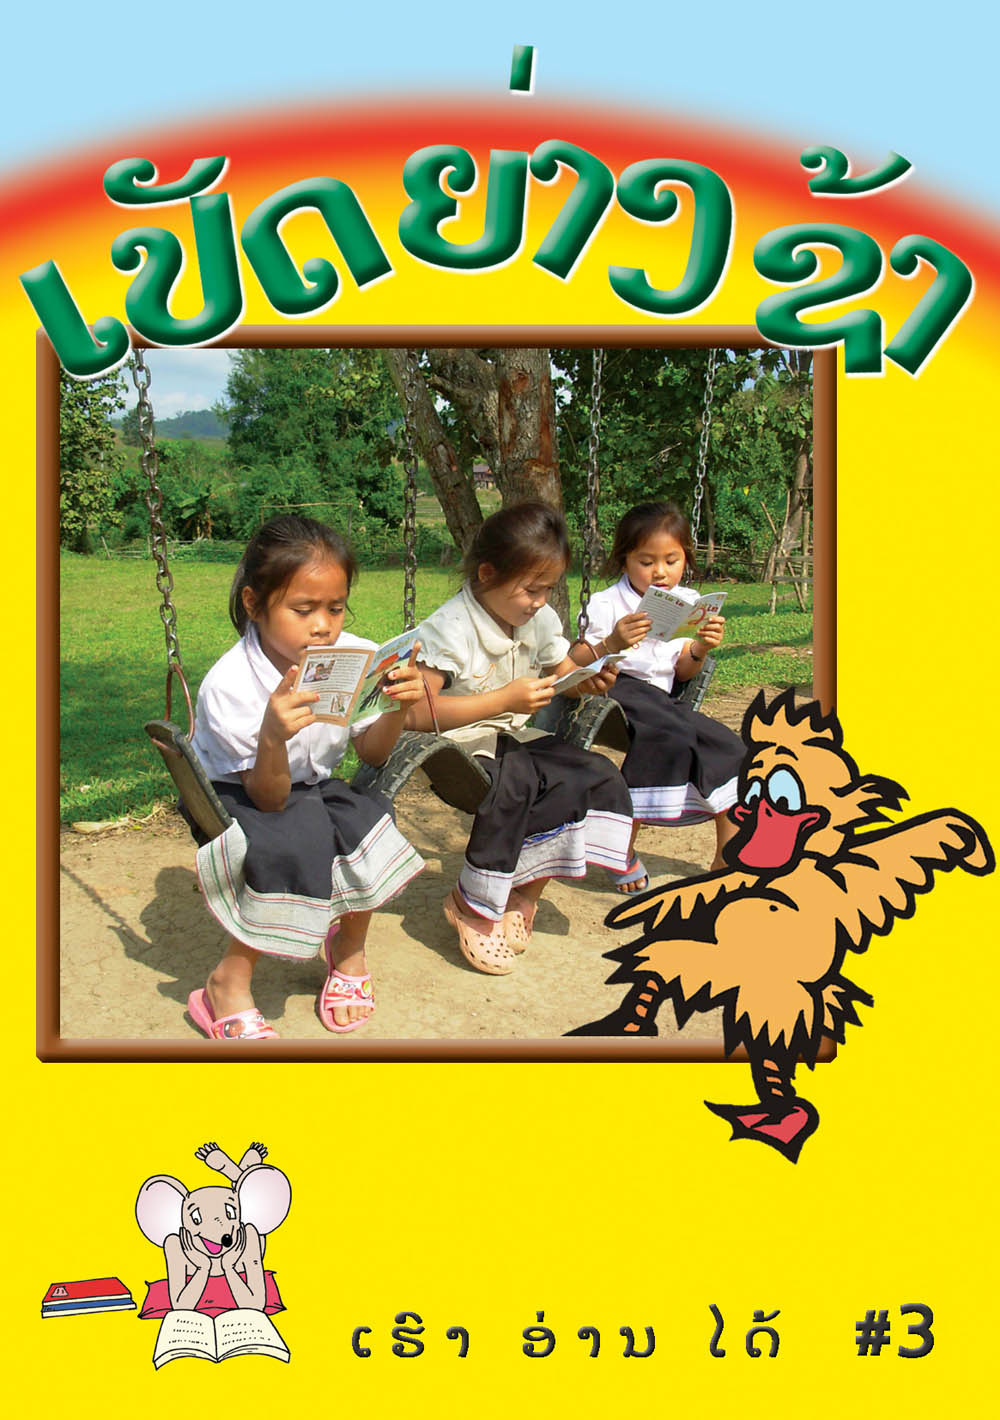 I Can Read! #3: The Duck Walks Slowly large book cover, published in Lao language